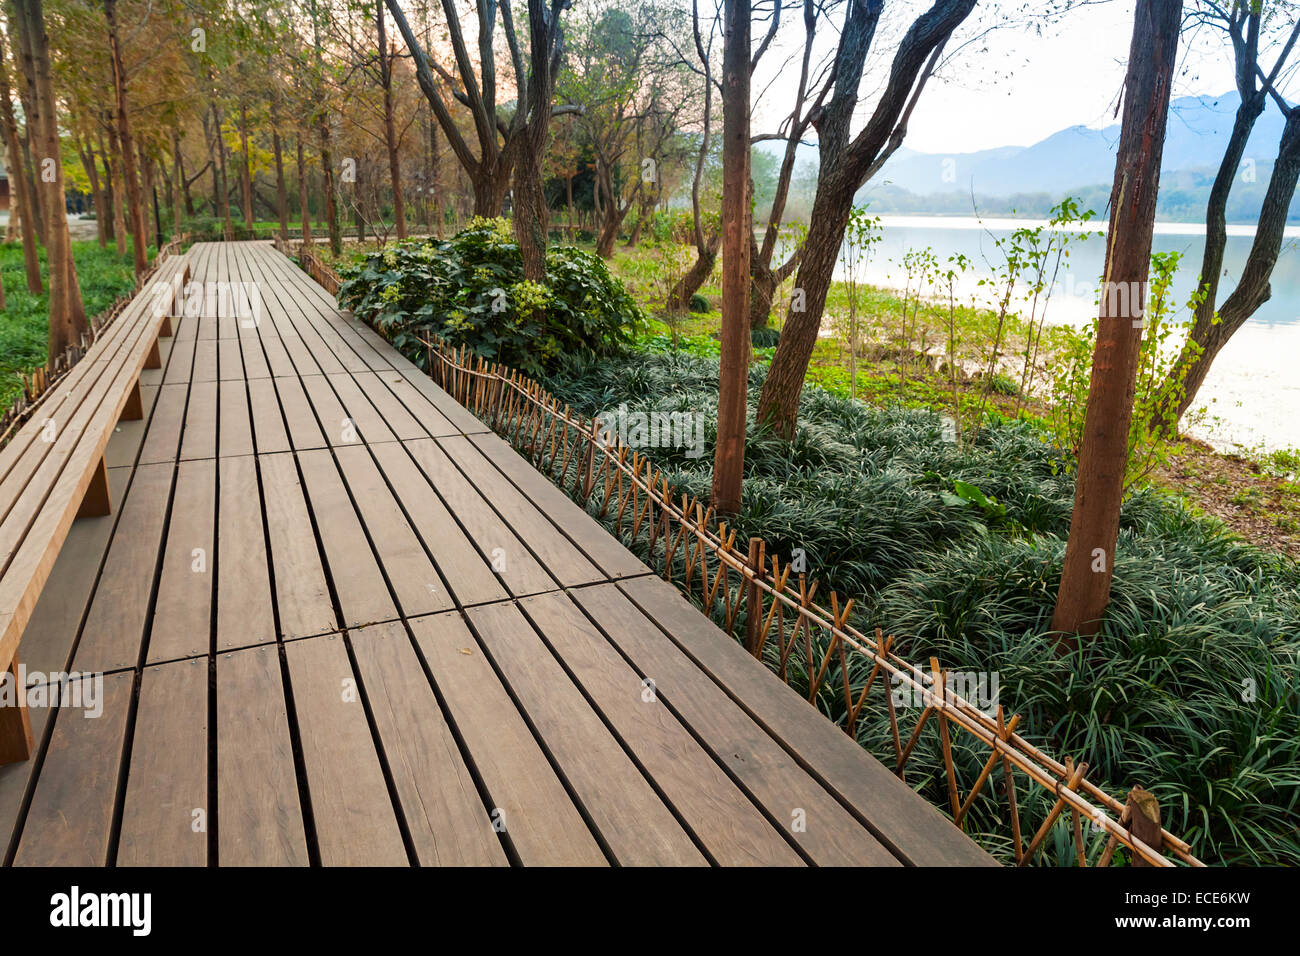 Wooden pathway. Walking around famous West Lake park in Hangzhou city center, China Stock Photo